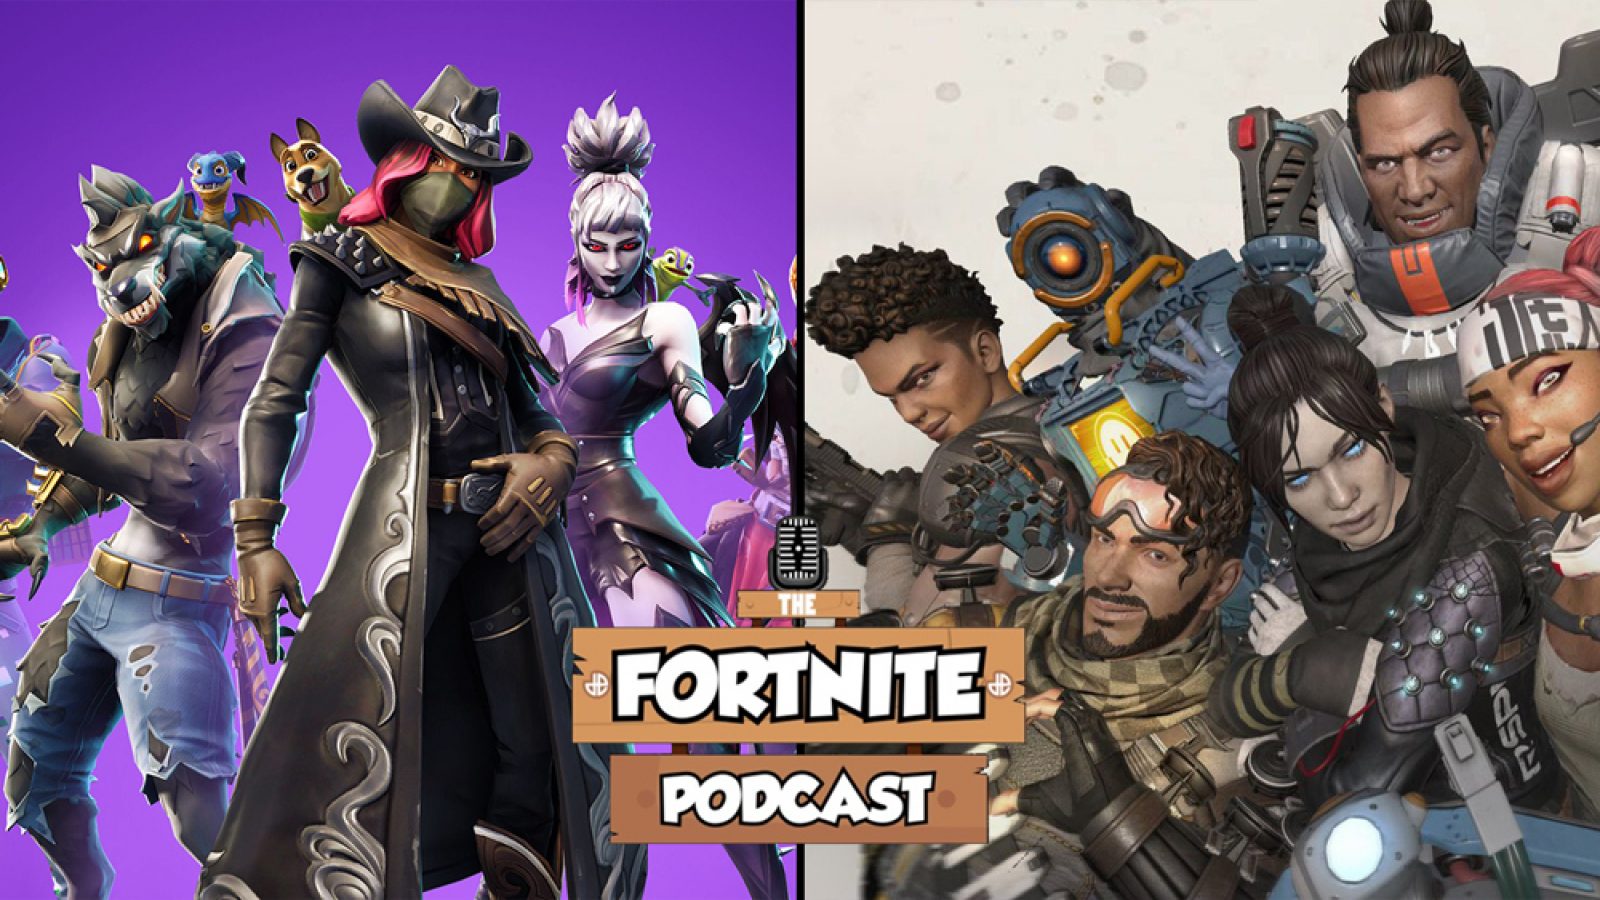 Is Fortnite a Dead Game in 2022? - Dot Esports